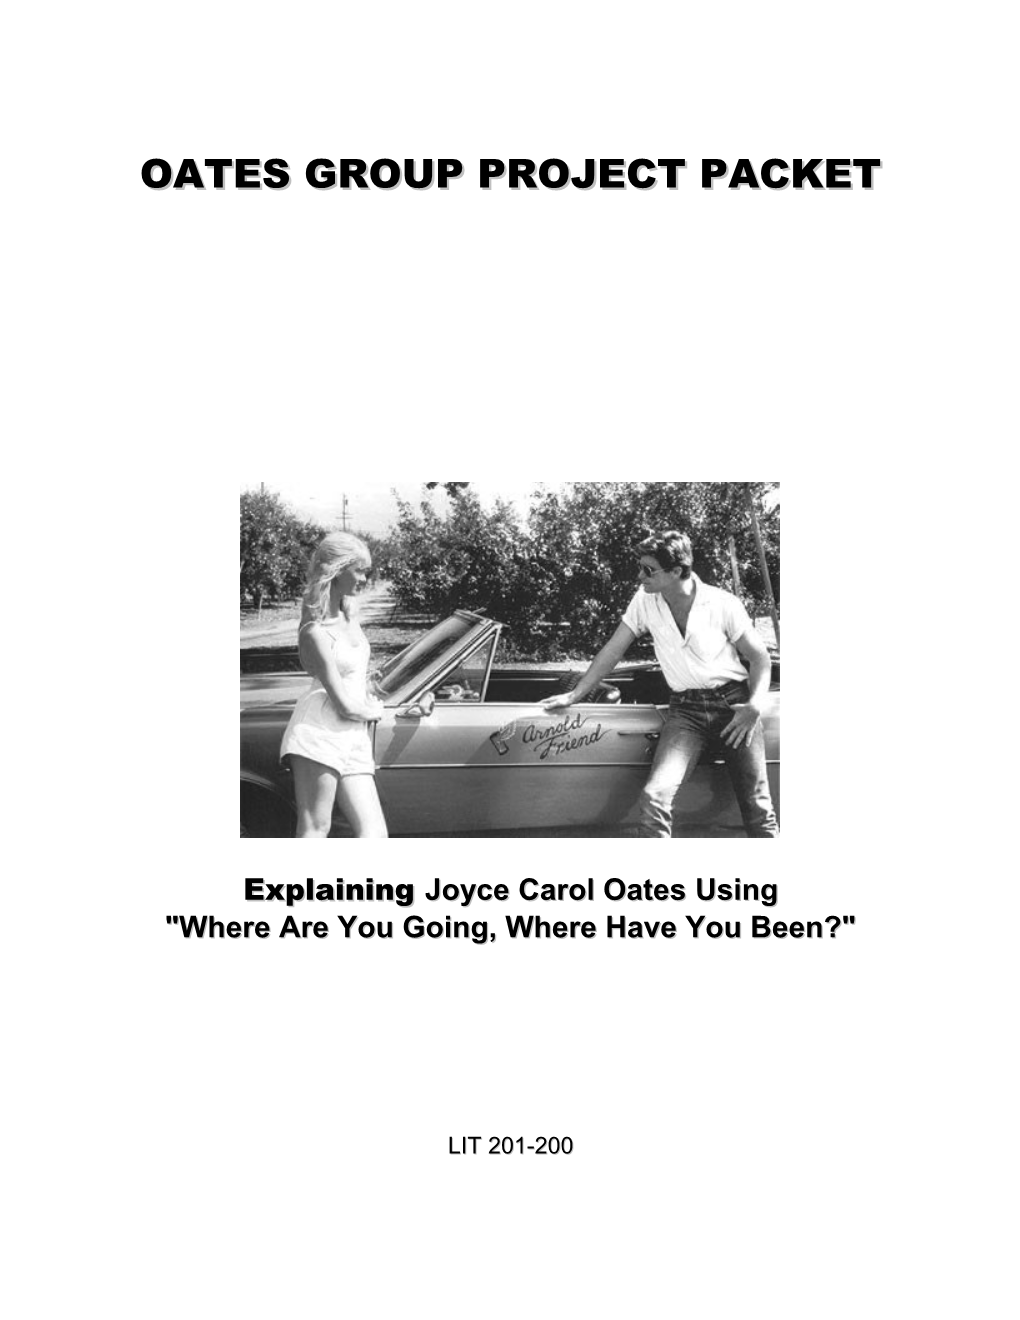 Group Project Packet